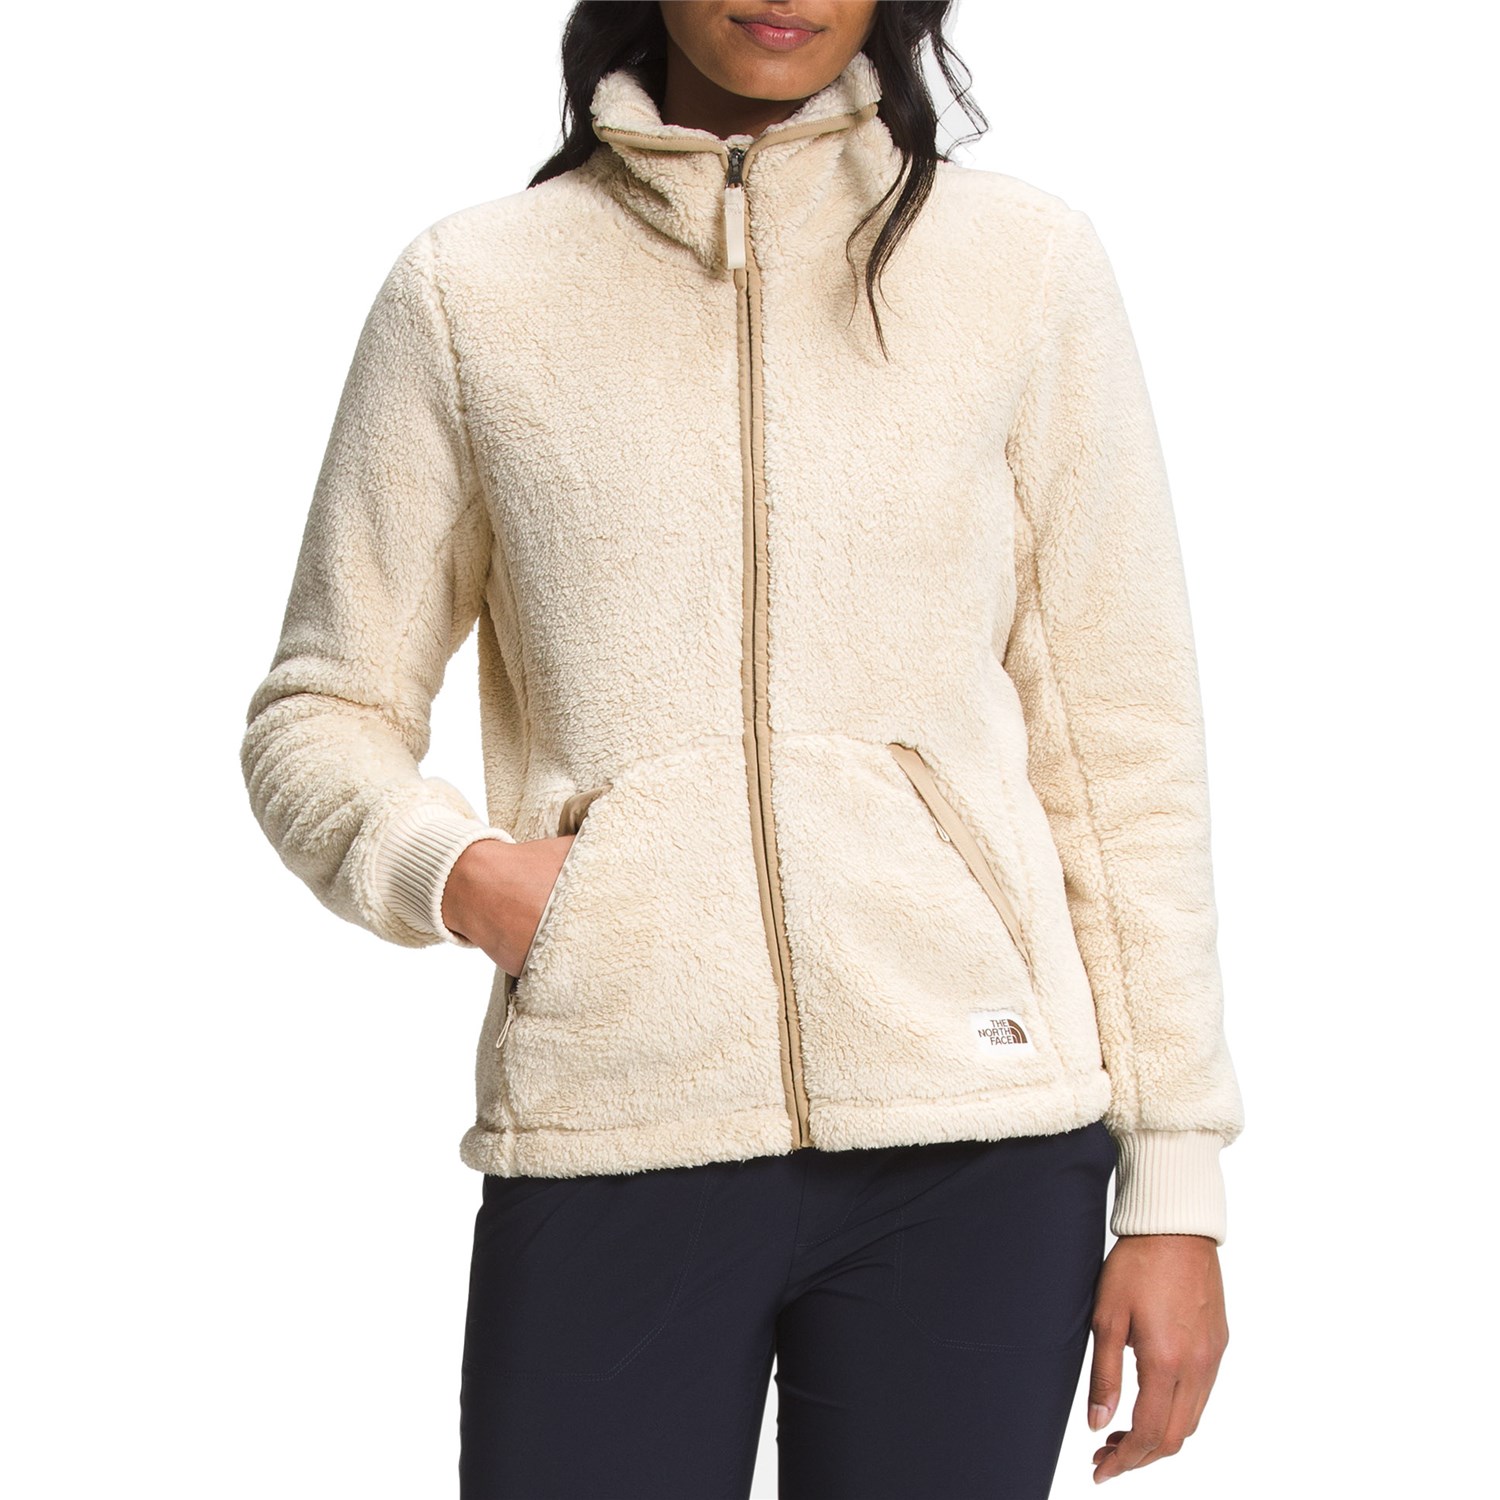 This 'Toasty Warm' Fleece Vest Is Up to 52% Off at